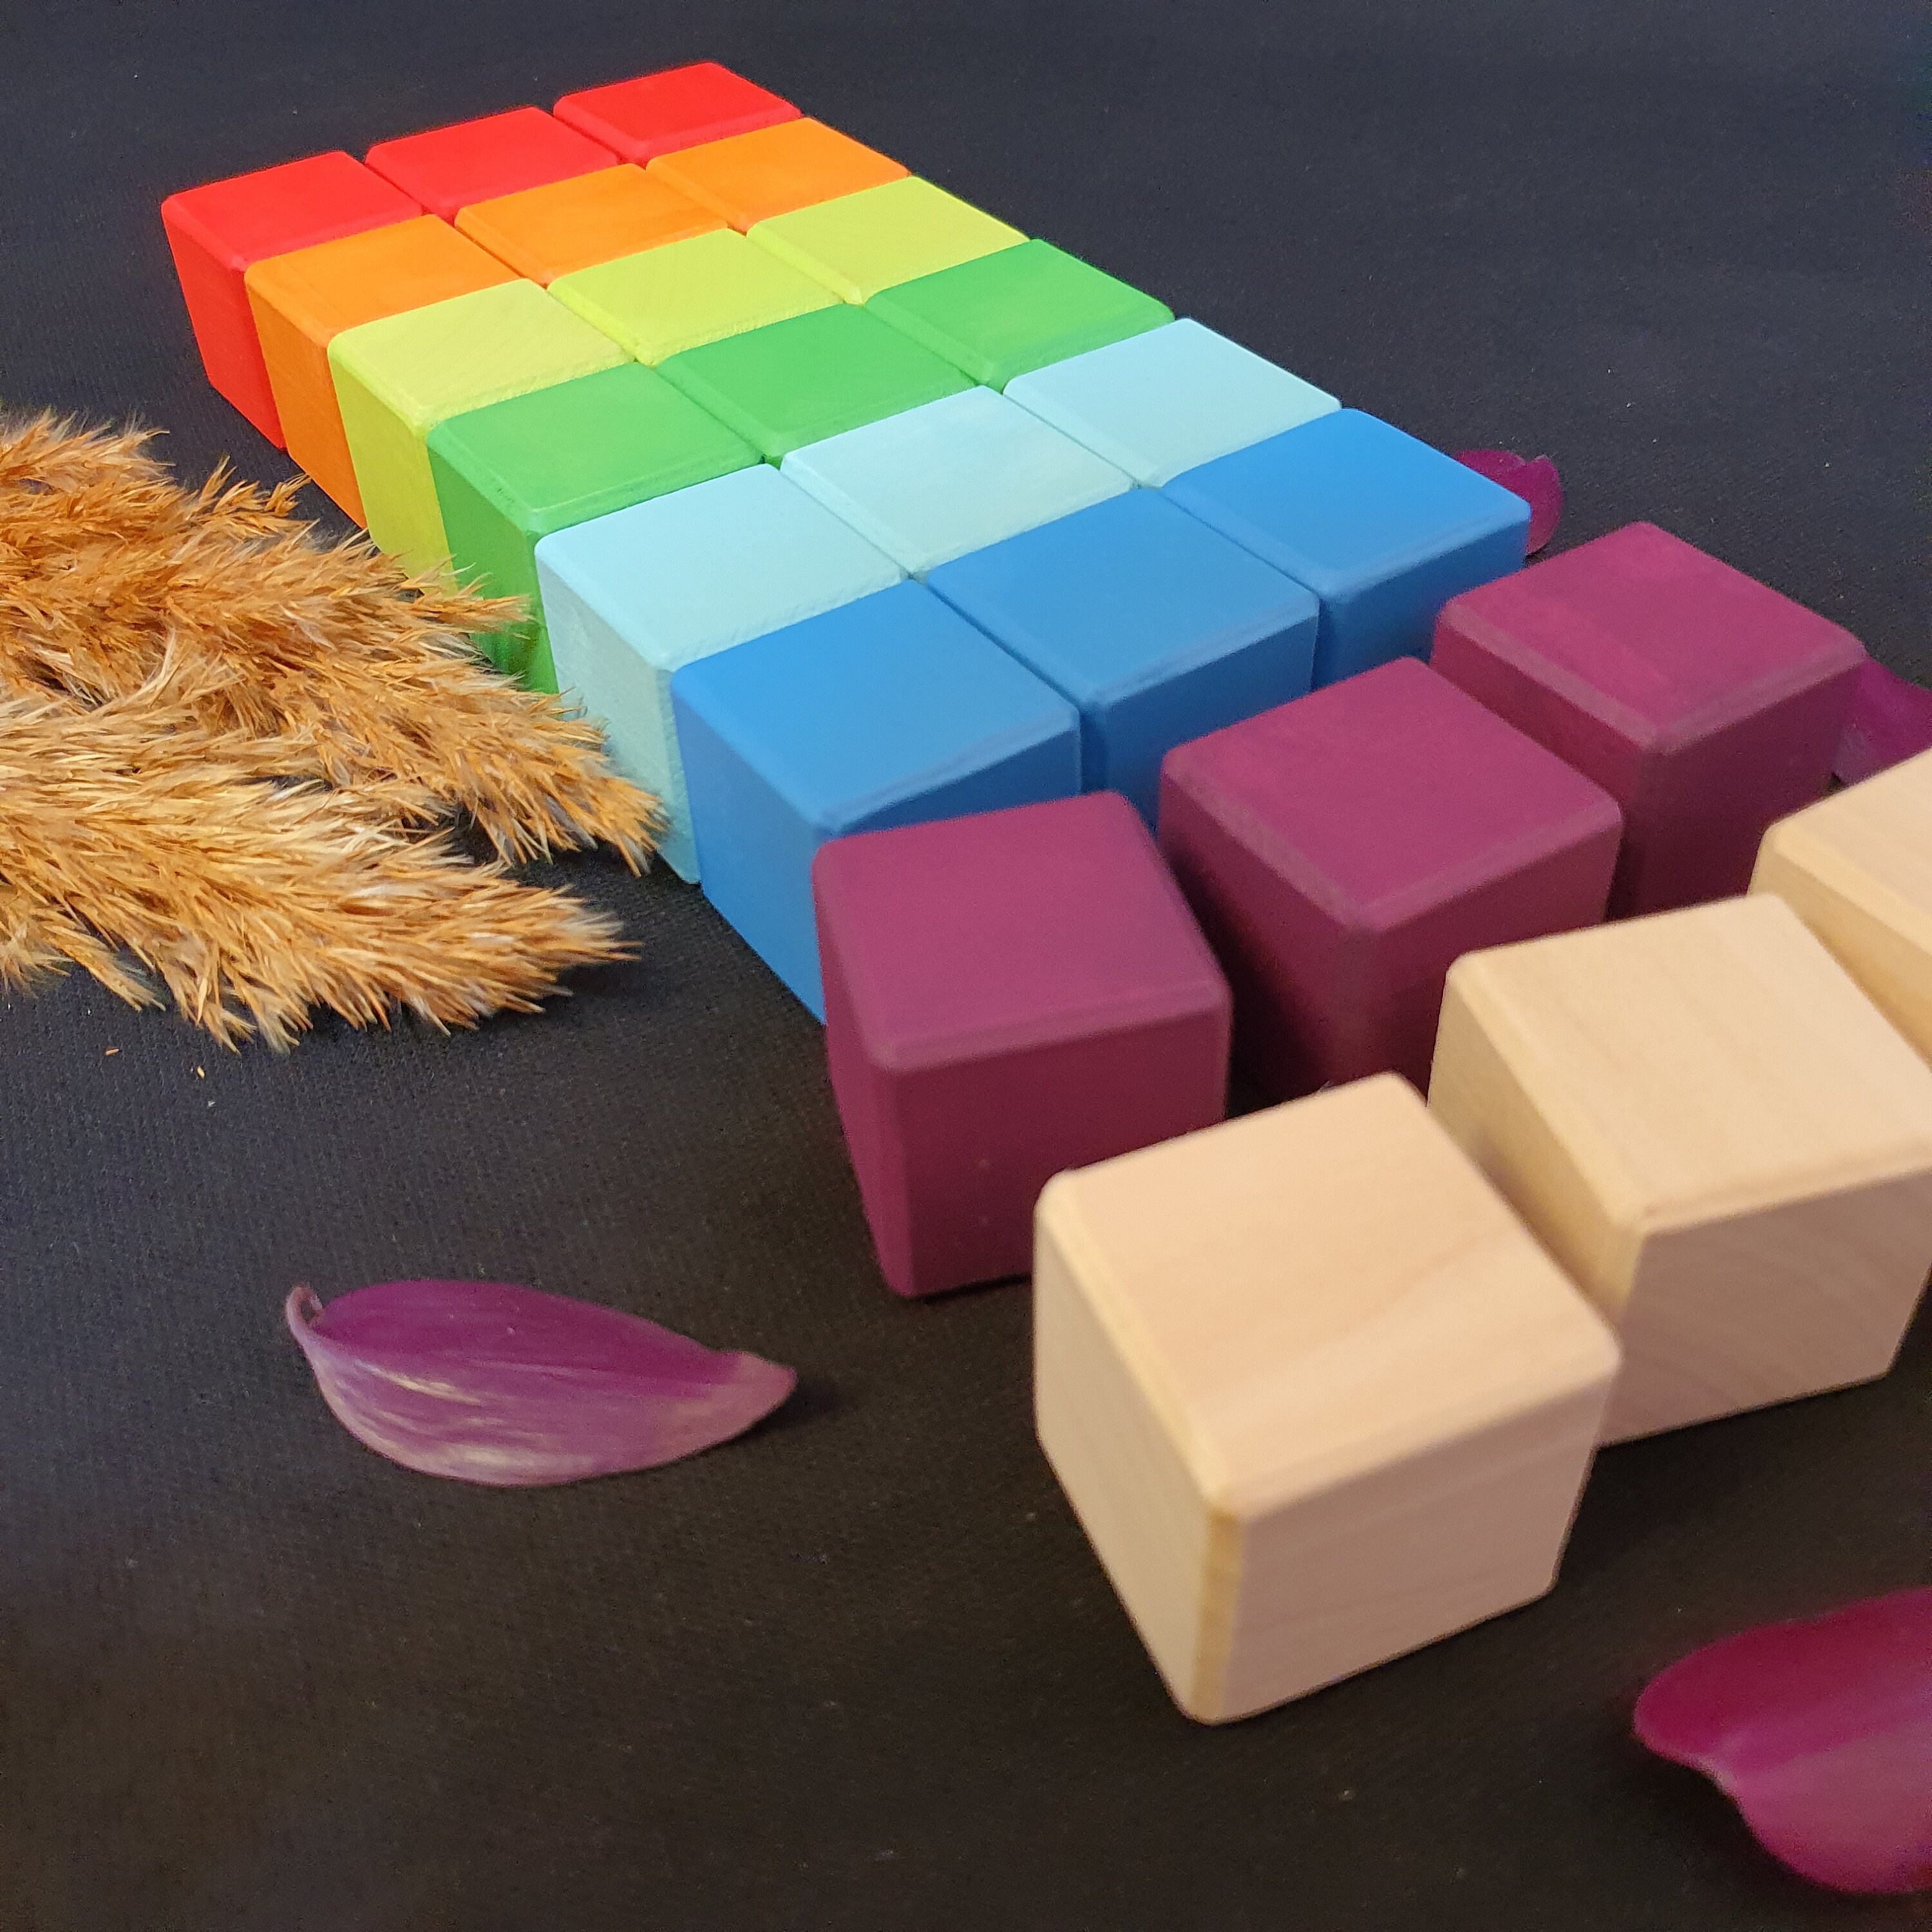 16 Pcs Multi-Color-M Huyghdfb Multi Color Wooden Building Blocks Set，Natural Wood Toy Rainbow Wooden Mini Stones Stacking Game Rock Blocks 